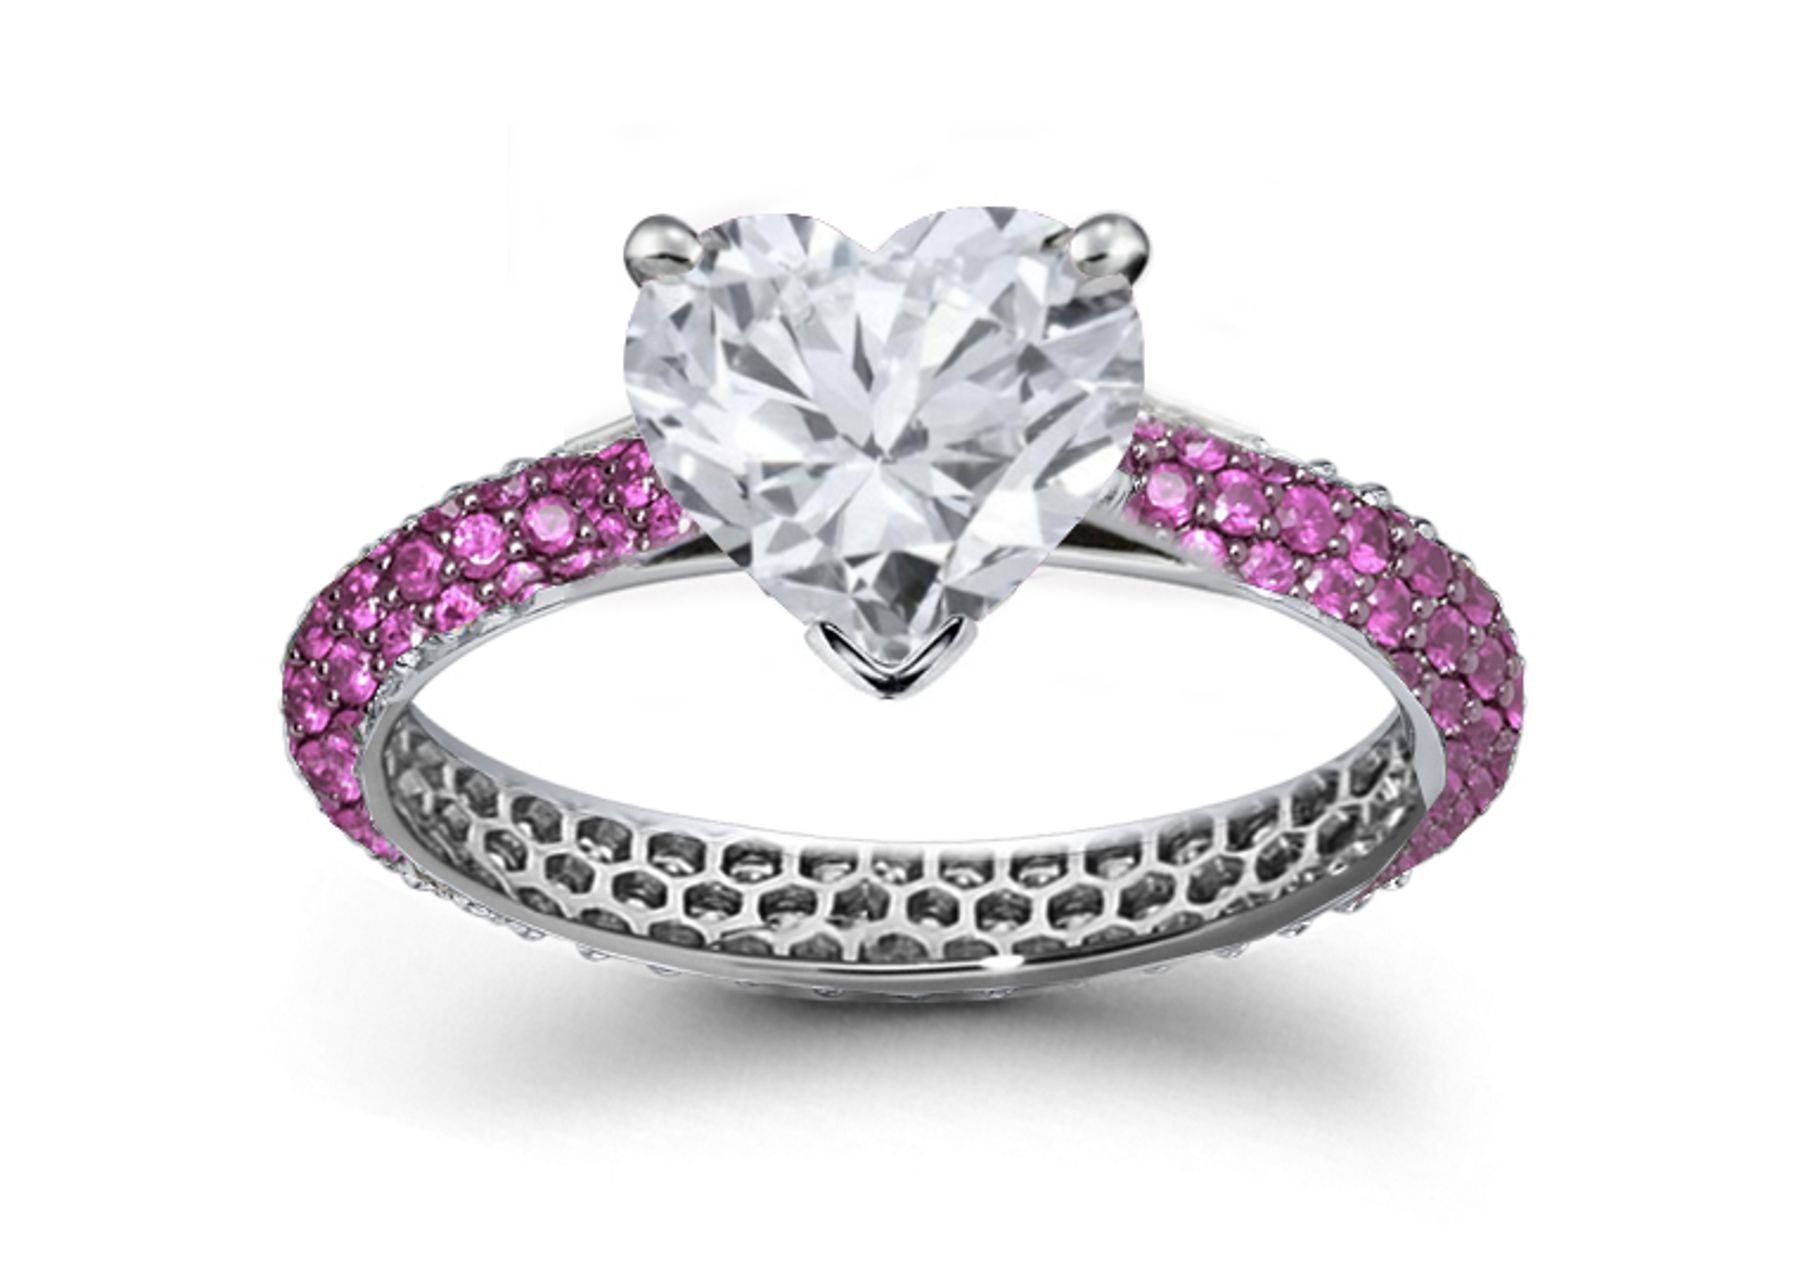 Fluttering Wings Gallery: Pave Set Pink Sapphire & & Heart White Diamond Ring